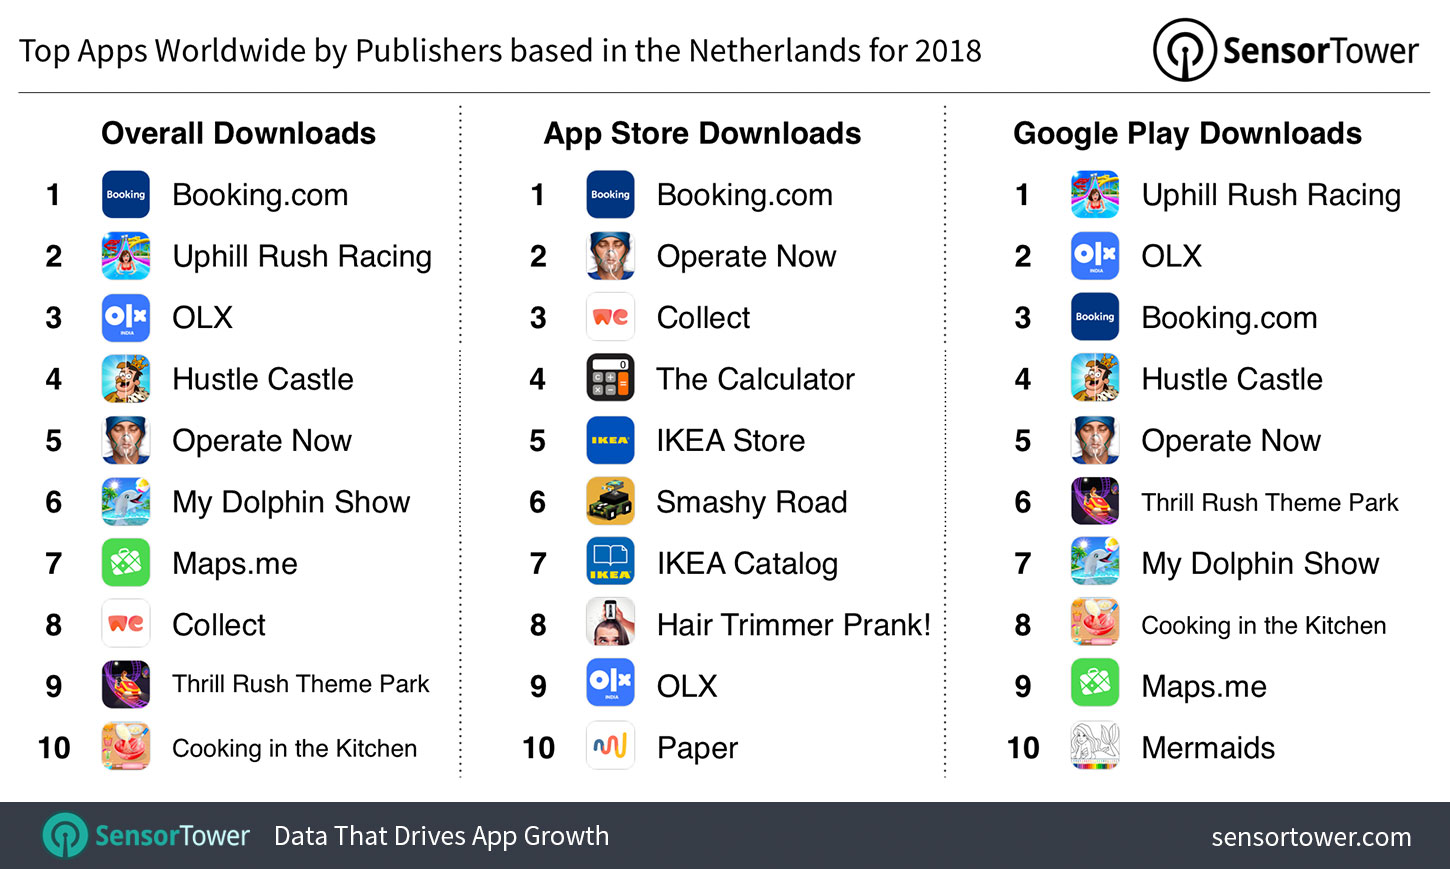 Top Apps by Publishers based in The Netherlands for 2018 by Downloads